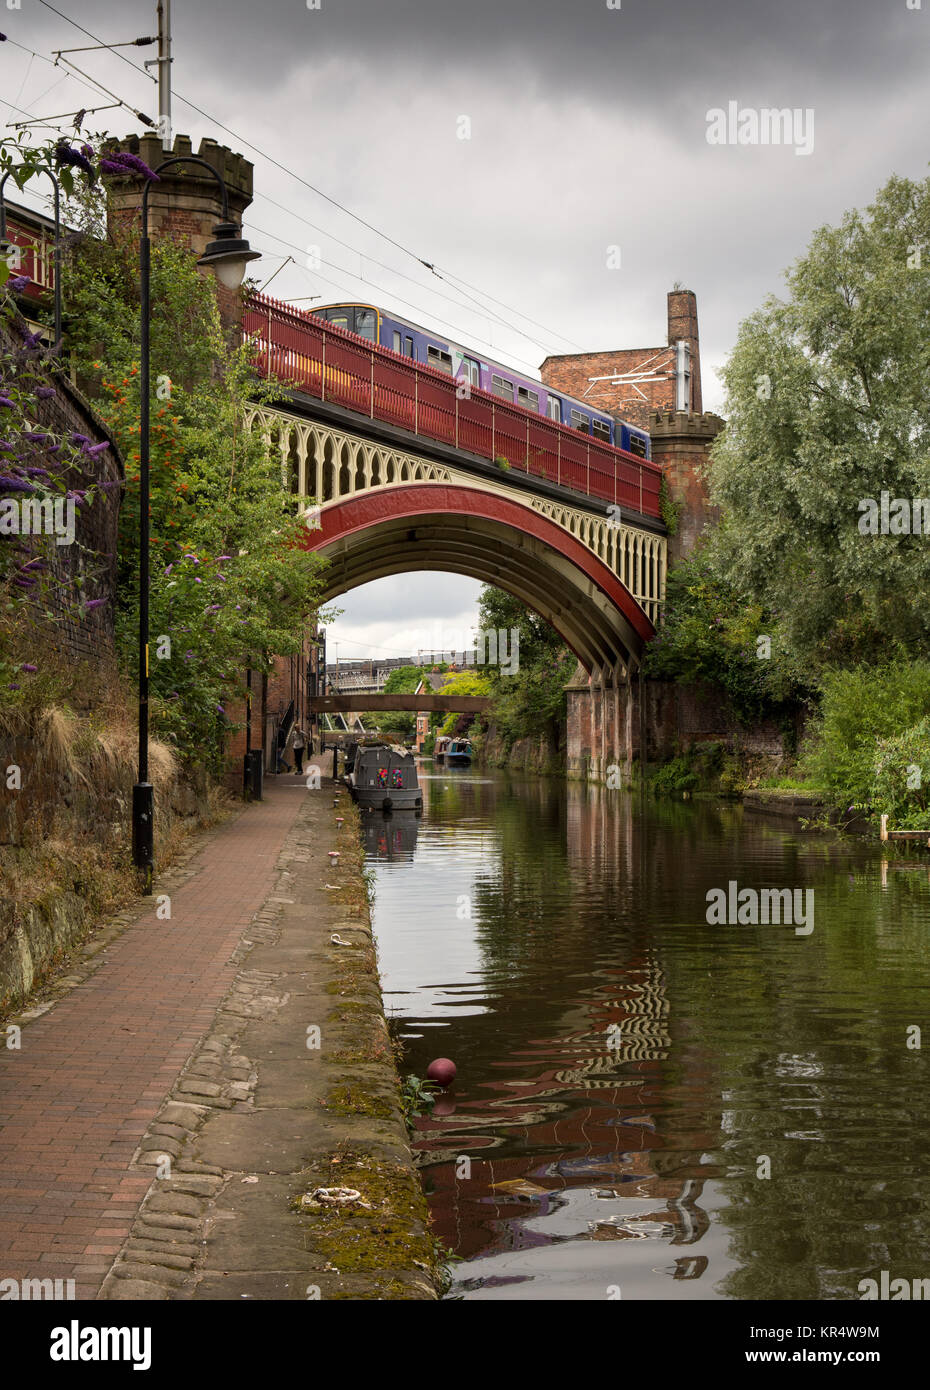 Manchester, England, UK - August 2, 2015: A Northern Rail Class 150 diesel passenger train crosses the Bridgewater Canal at Deansgate in central Manch Stock Photo